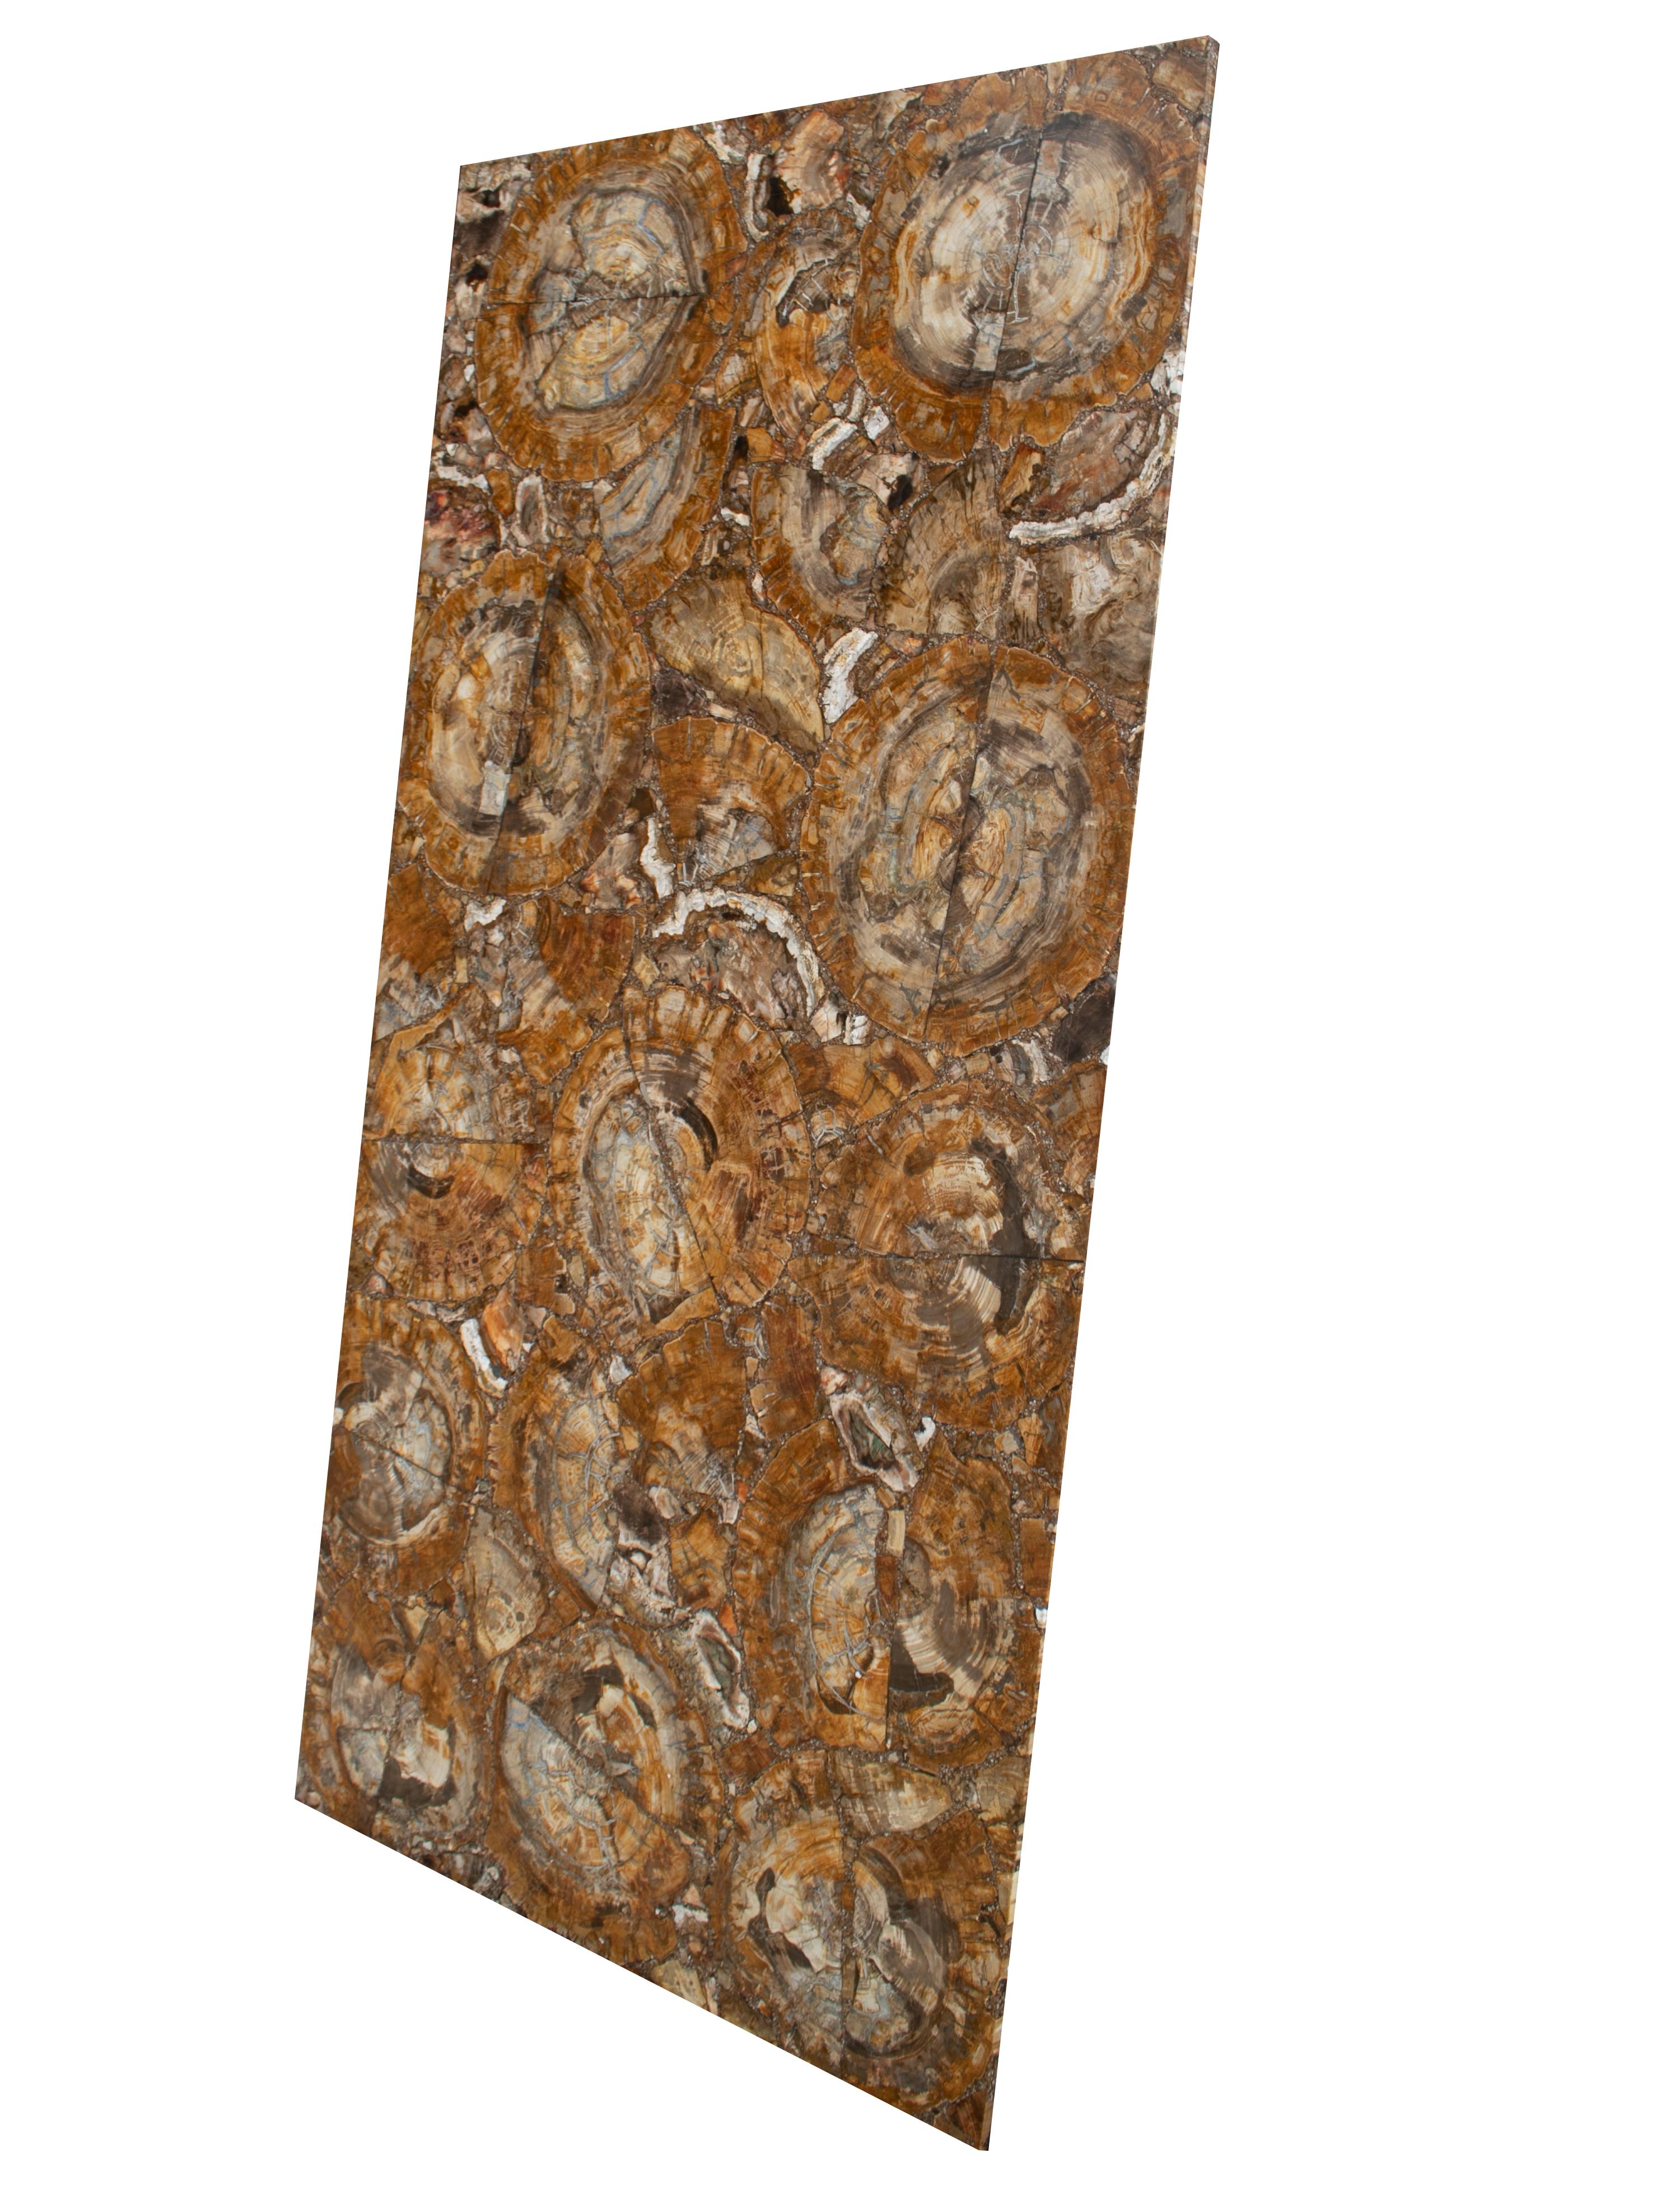 Fossilized tree trunk mosaic tabletop.